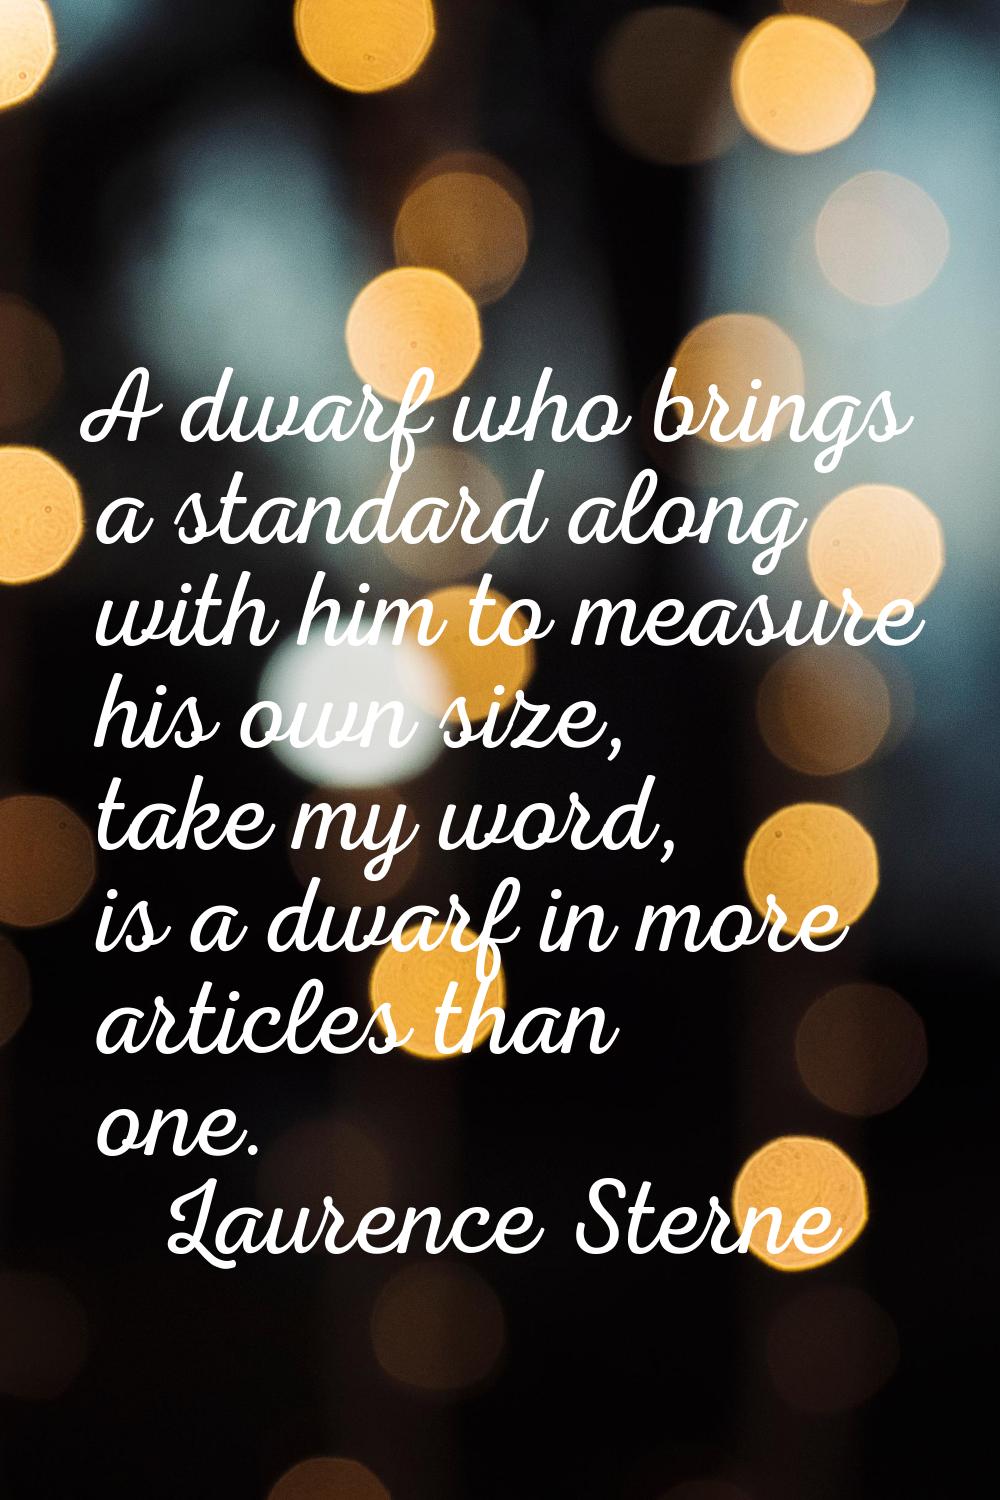 A dwarf who brings a standard along with him to measure his own size, take my word, is a dwarf in m